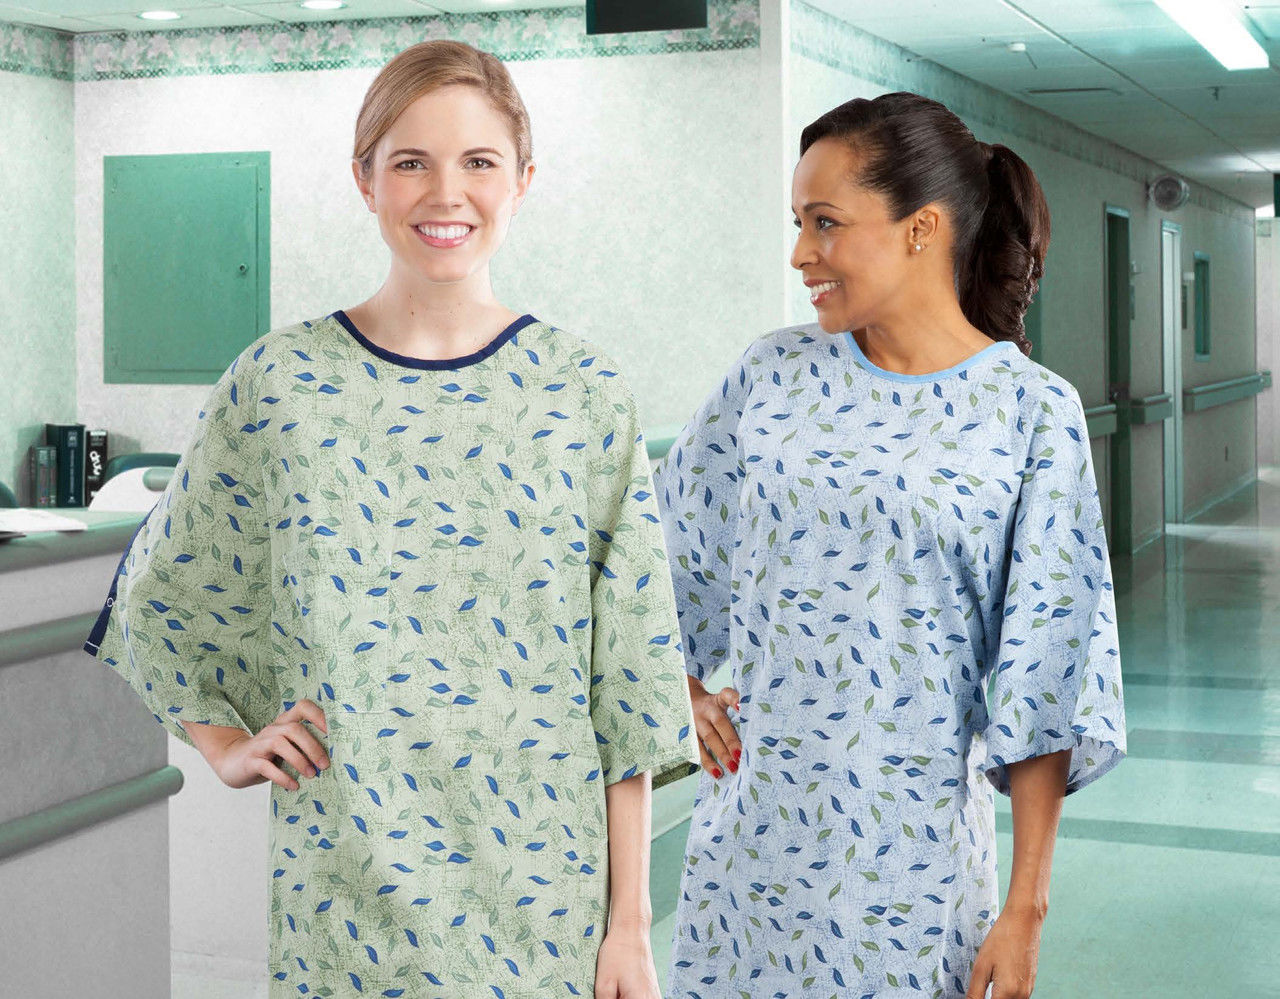 How is the design of ADI polyester patient gowns beneficial?